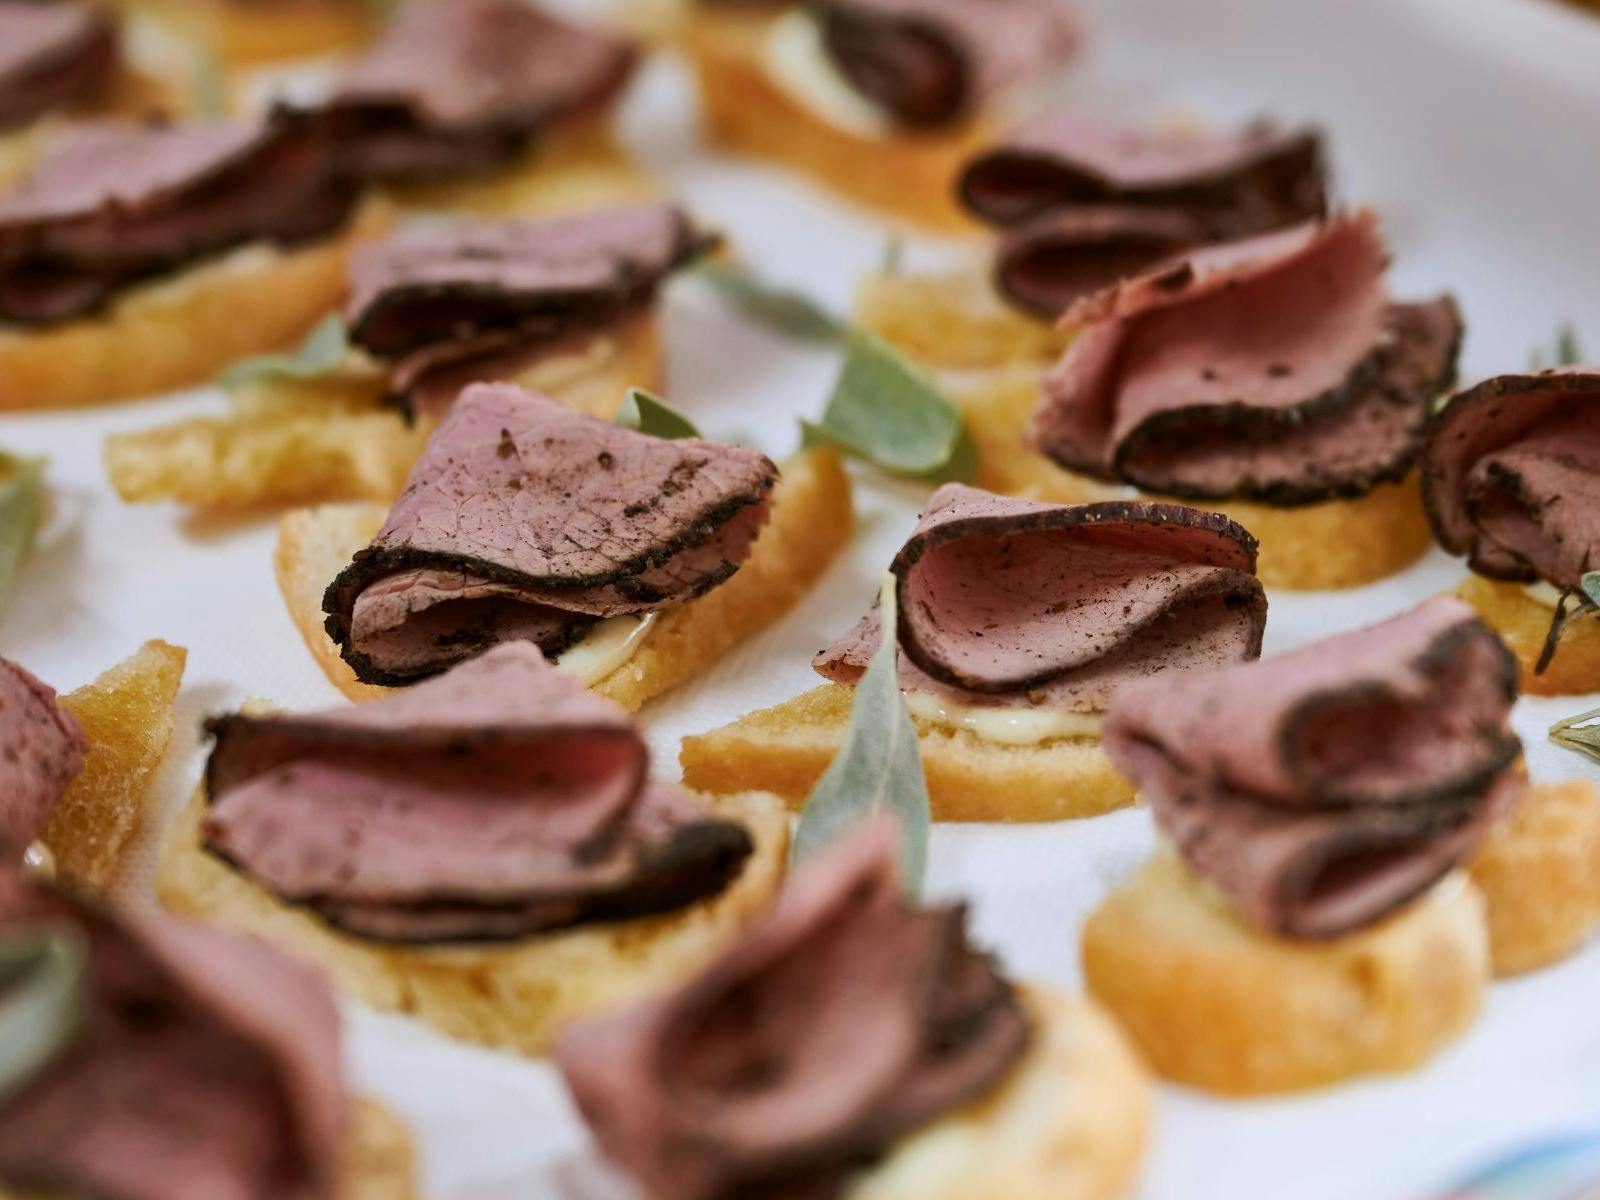 Beef is folded in bite sized pieces on crackers, ready to serve.